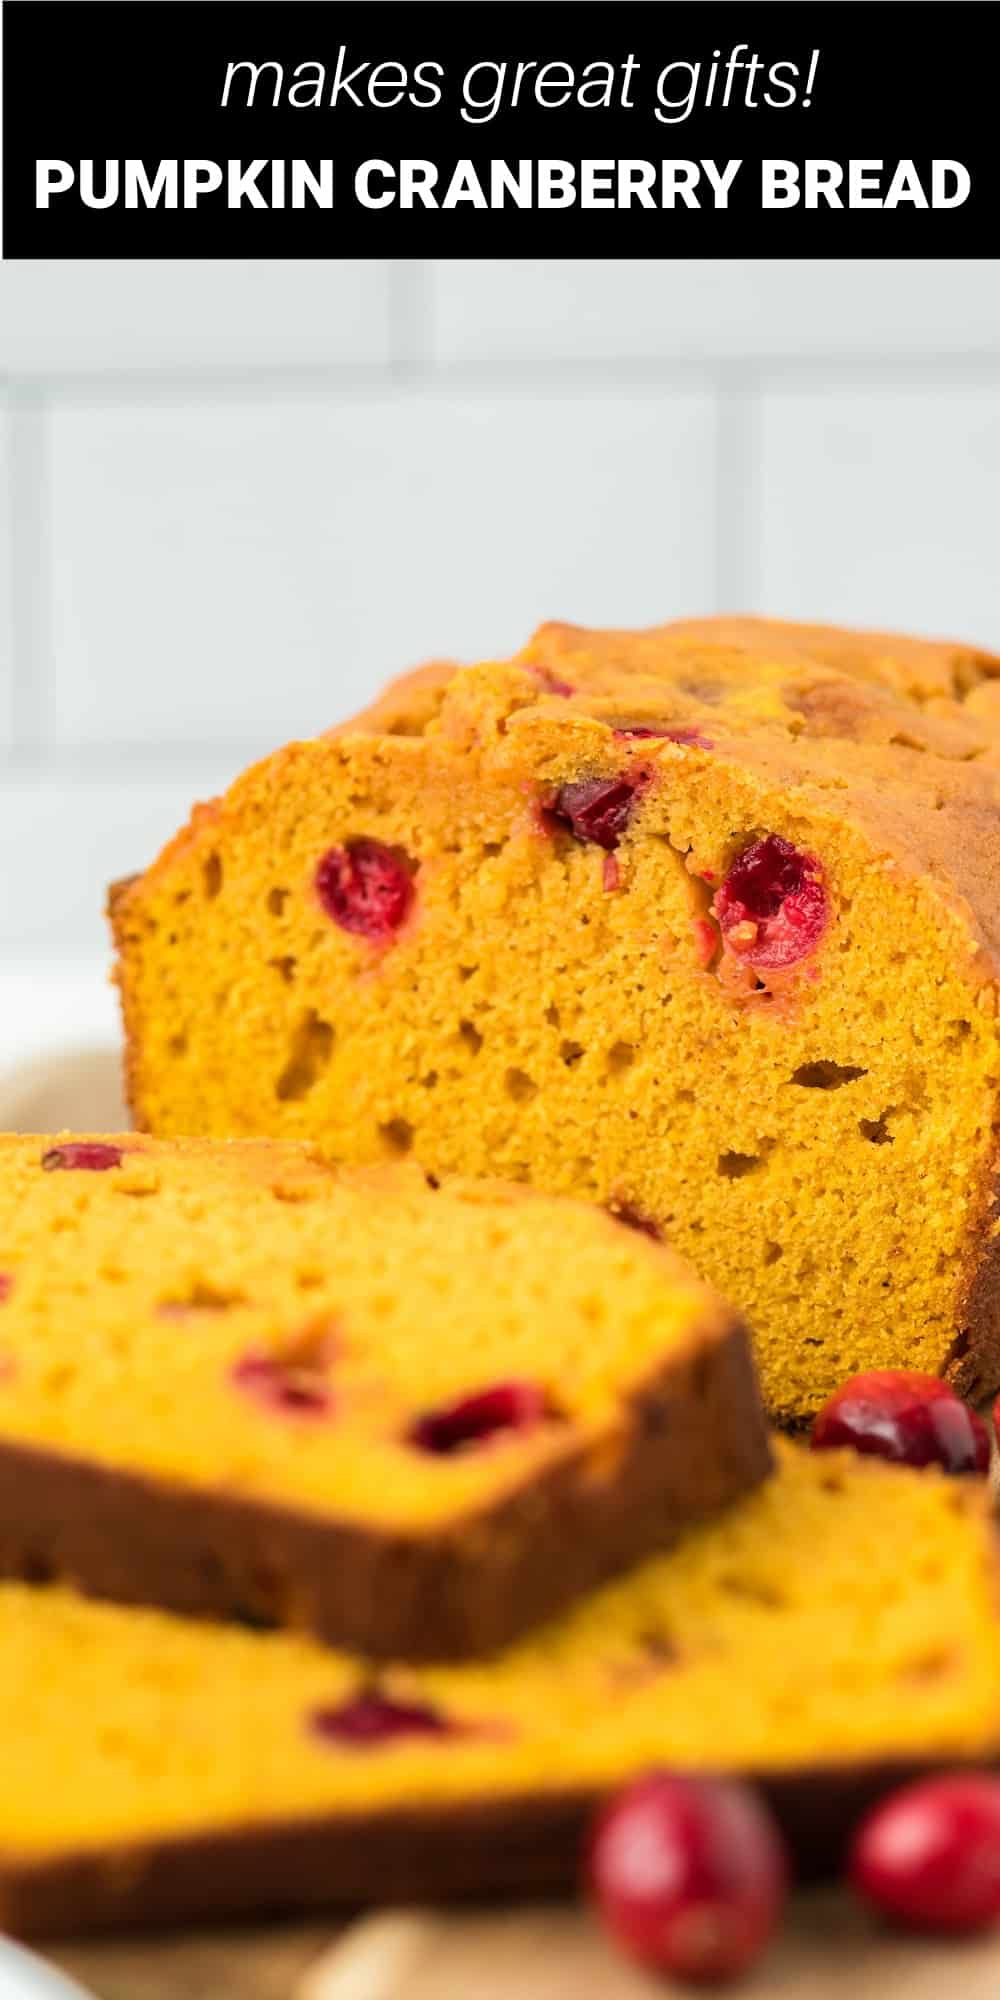 This Pumpkin Cranberry Bread recipe is moist, delicious and packed with all the wonderful flavors of fall. Fresh and juicy cranberries are studded throughout this holiday bread to provide the most delightful tangy pop of fresh flavor. And since this recipe makes two loaves, there will be enough to share or to freeze for later. 